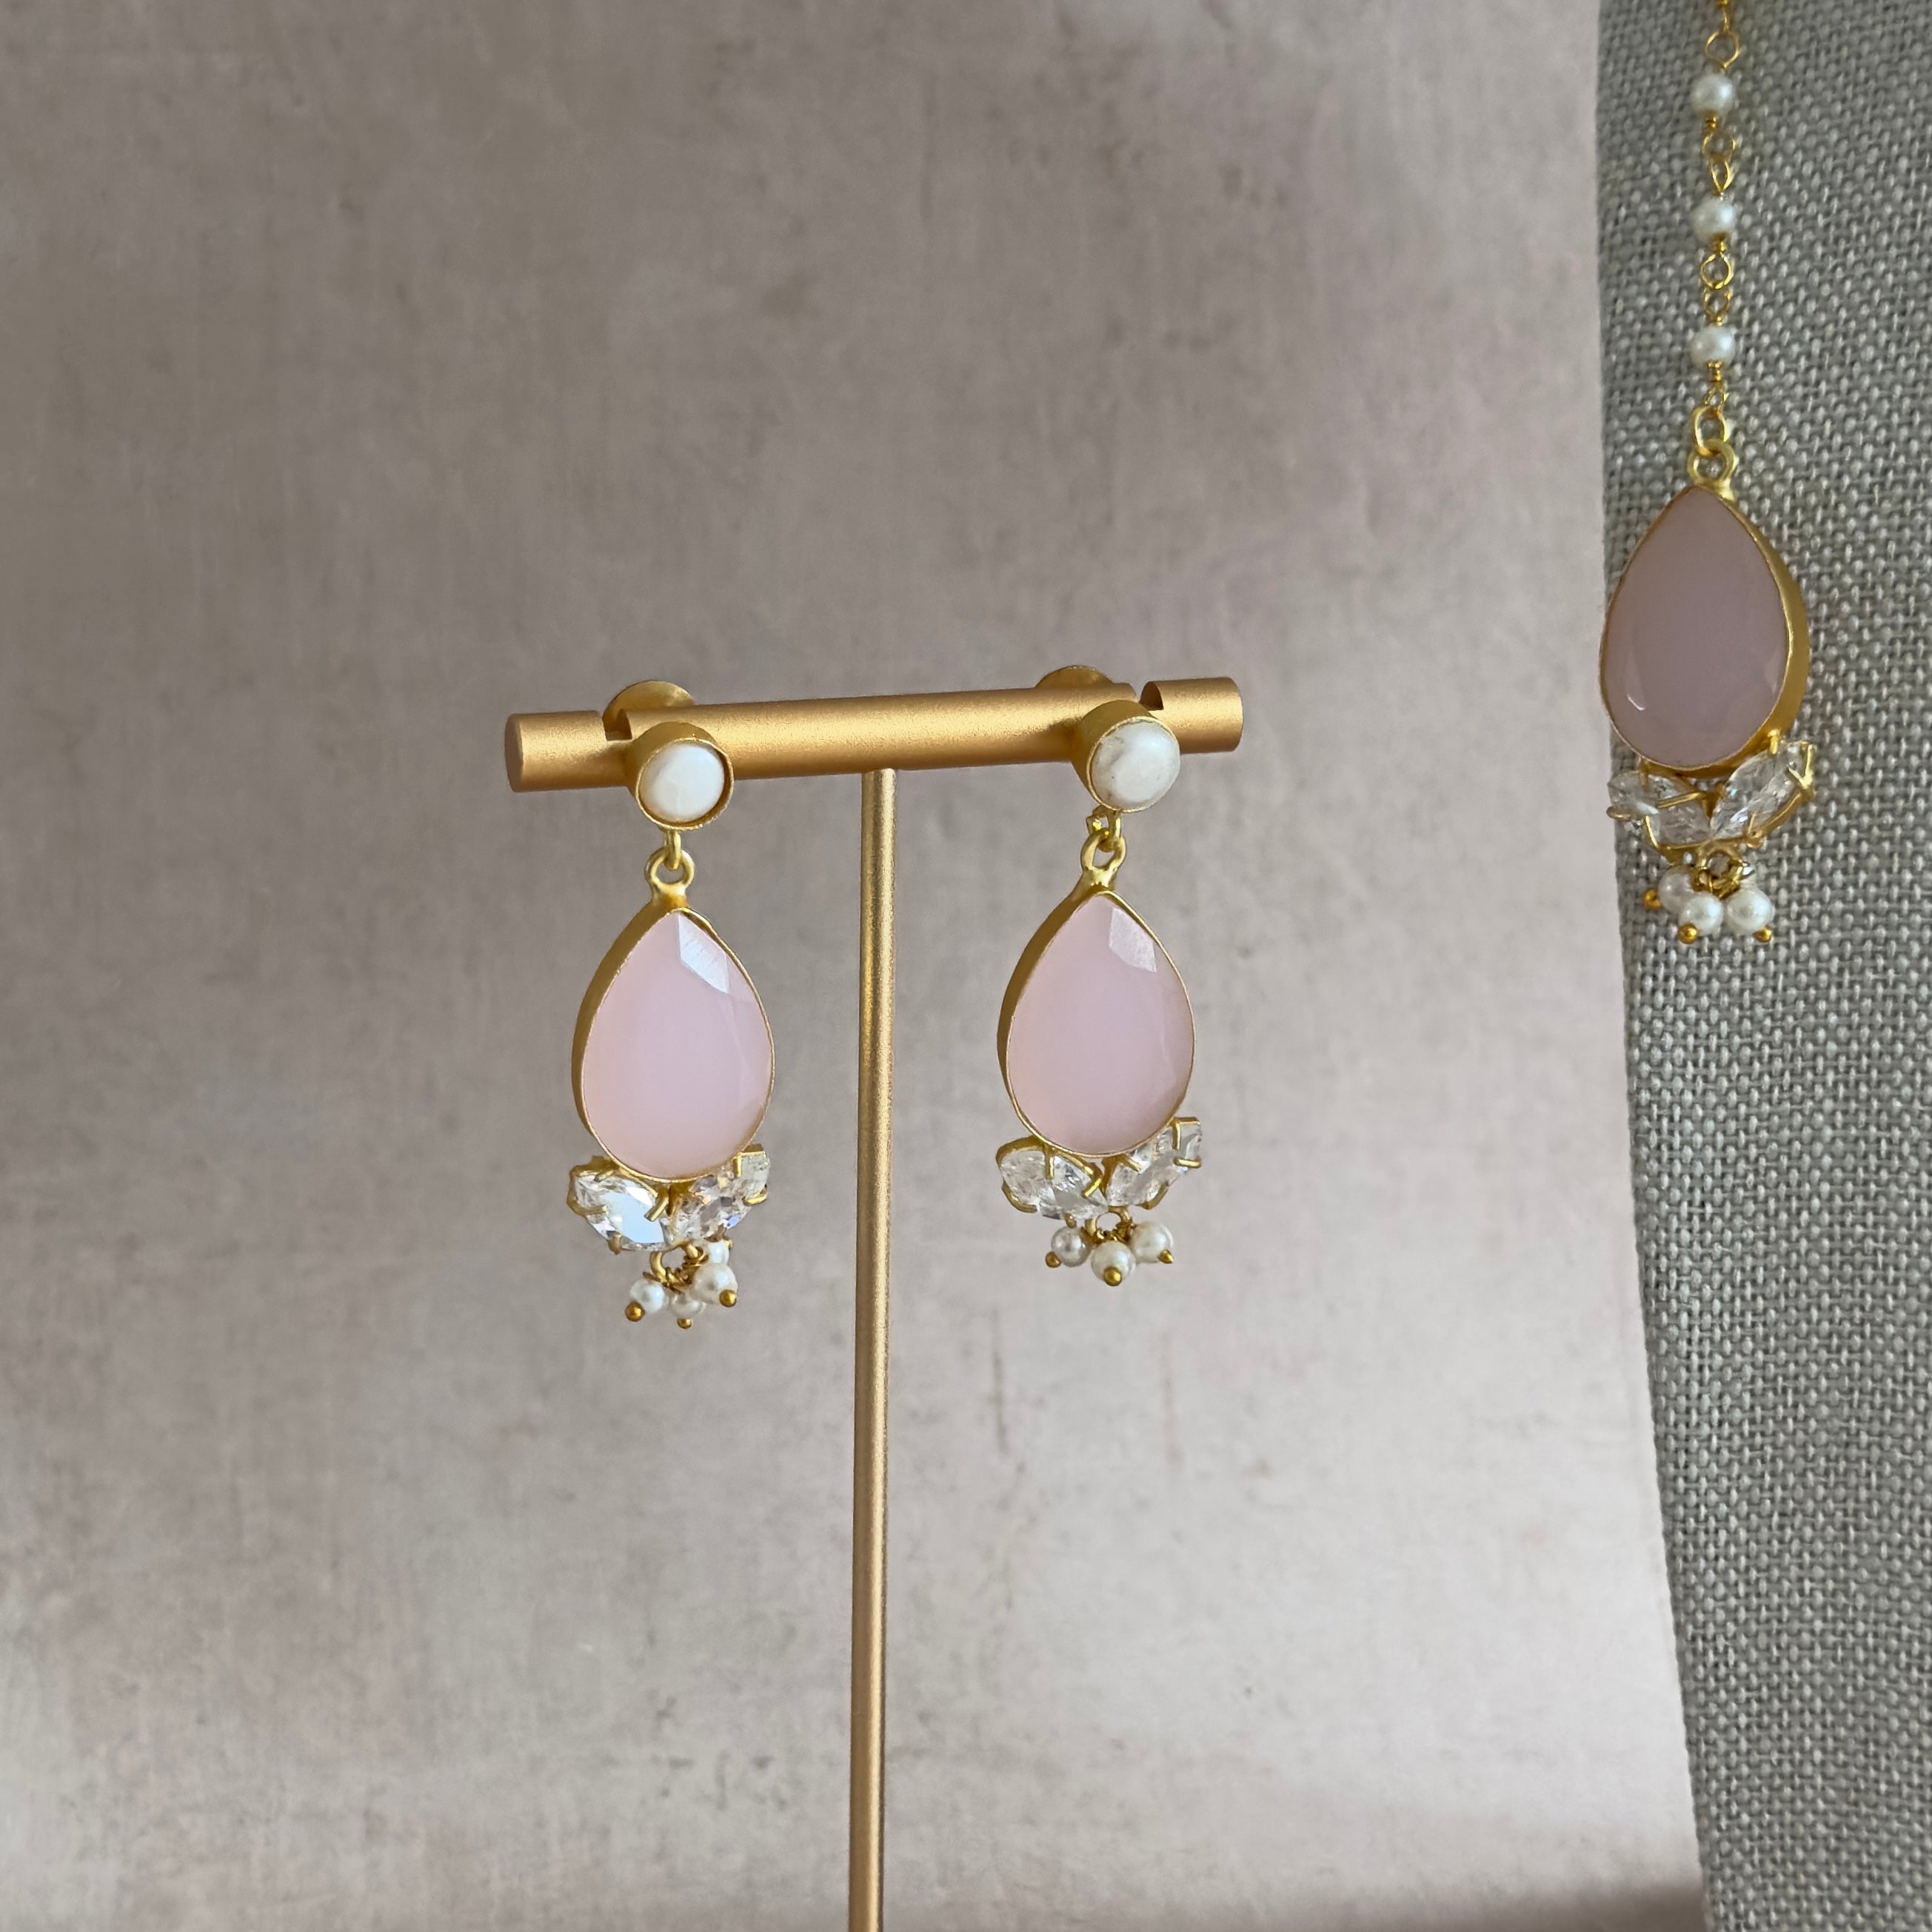 Bring a touch of elegance to any outfit with our Ari Pink Choker Set! Featuring beautiful freshwater pearls and exquisite cubic zirconia, this set is sure to elevate your look. The adjustable chain ensures a perfect fit, and it comes complete with matching earrings and tikka for a glamorous stunning look.